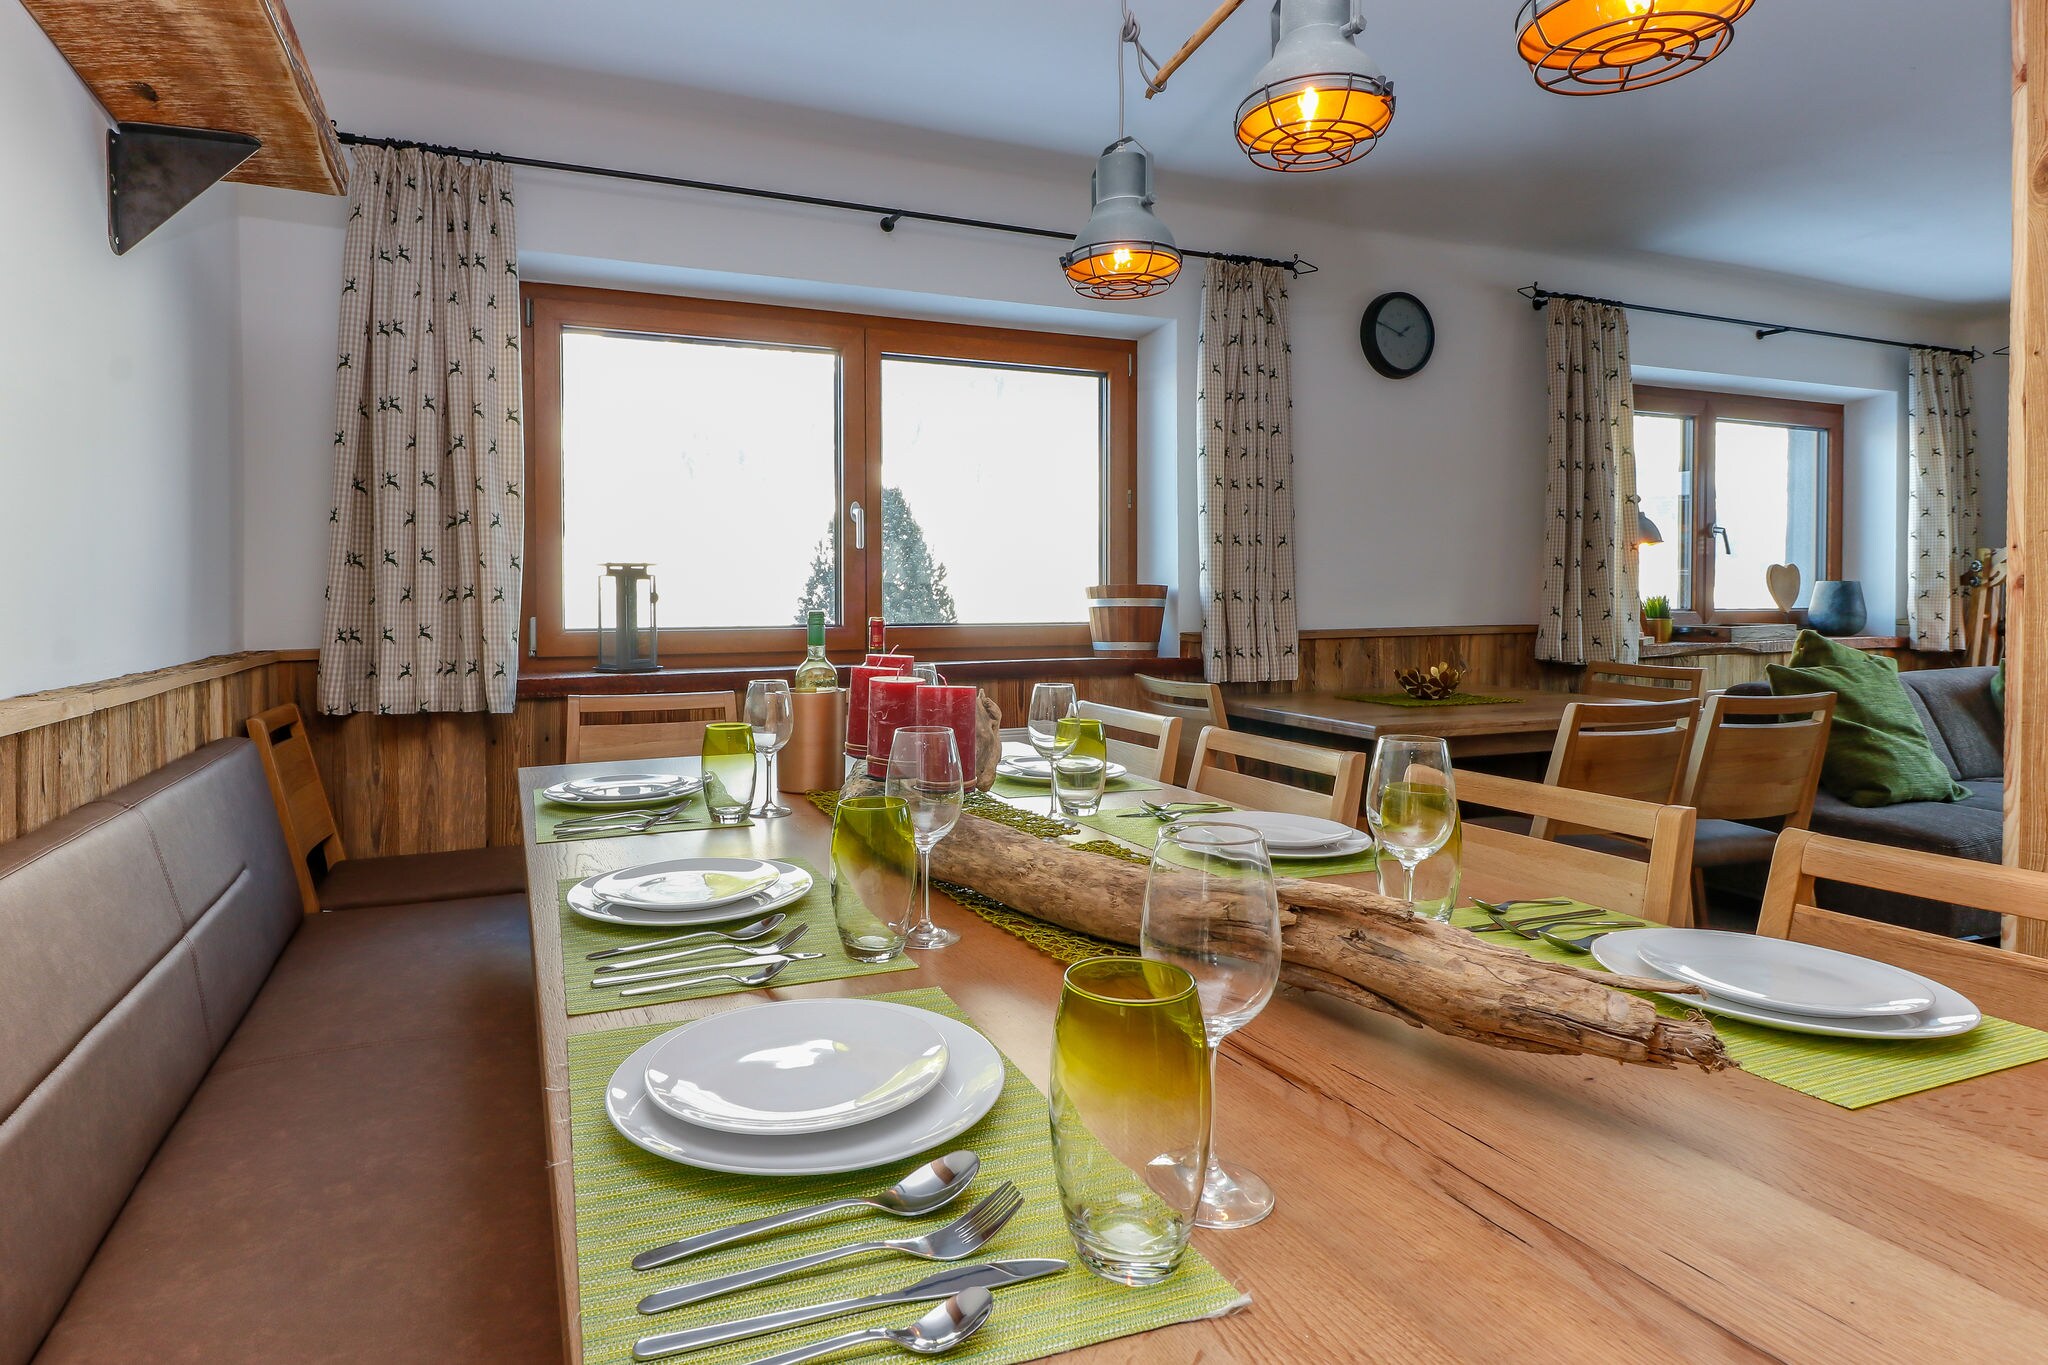 Luxurious holiday home in Rauris with ski storage and bbq